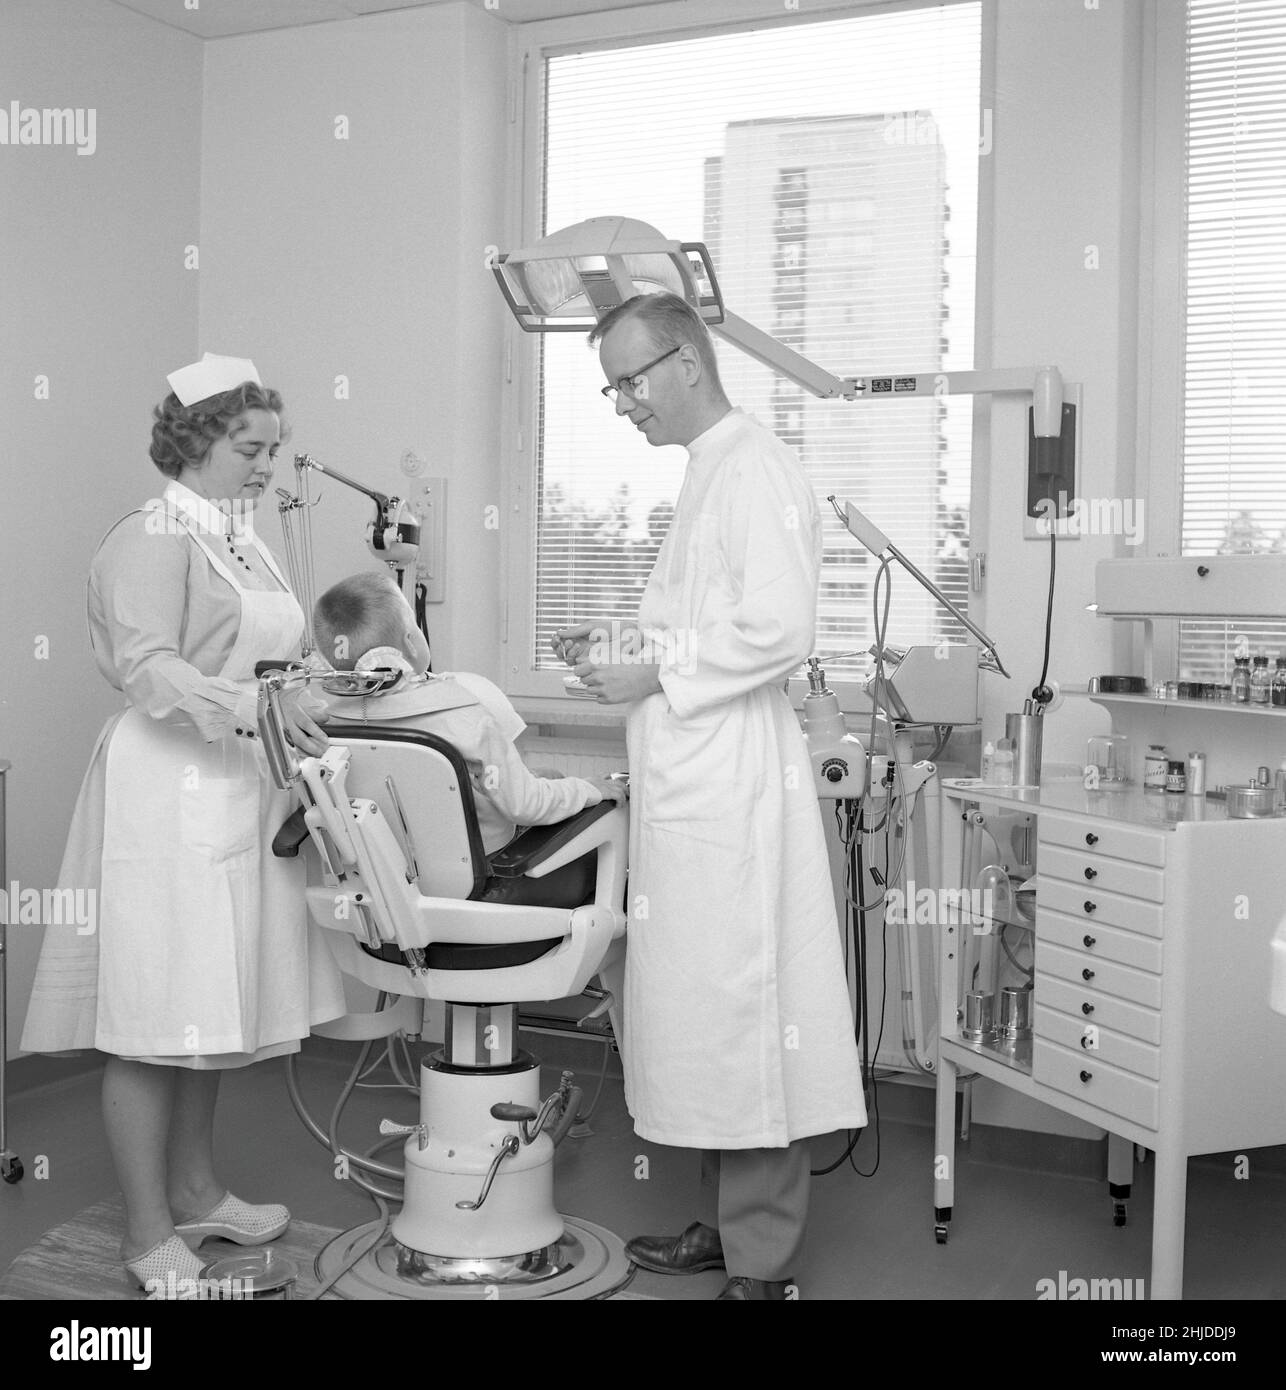 At the dentist in the 1960s. A boy is being examined and treated by a dentist. A nurse is assisting.  Sweden july 5 1962. Stock Photo